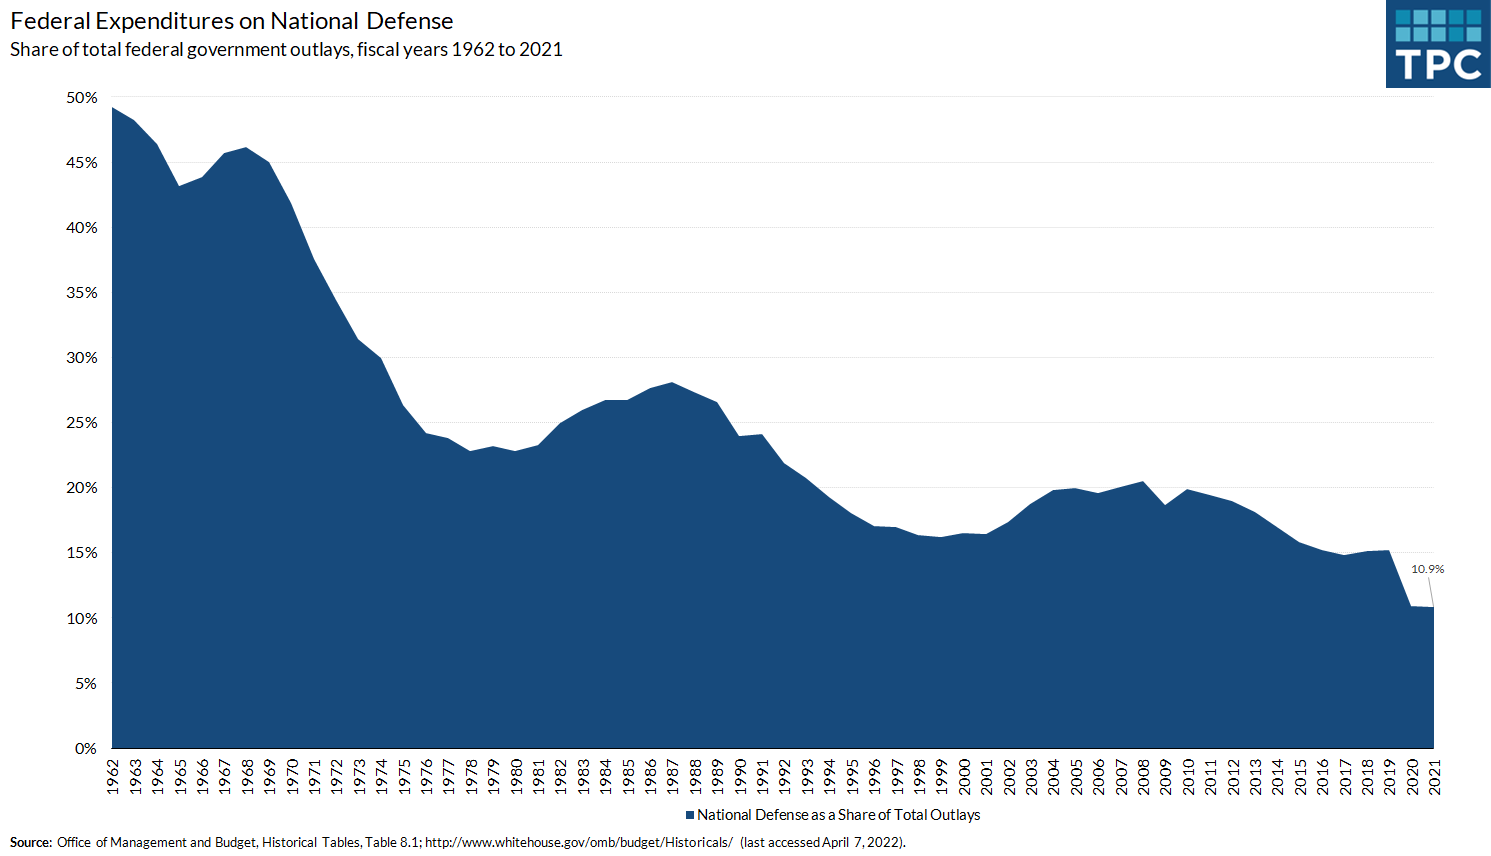 The federal government spent $742 billion on national defense, or about 11% of total federal expenditures in FY 2021, compared to over 40% in the 1960s. Over time, more spending has been towards Social Security, Medicare, and Medicaid.